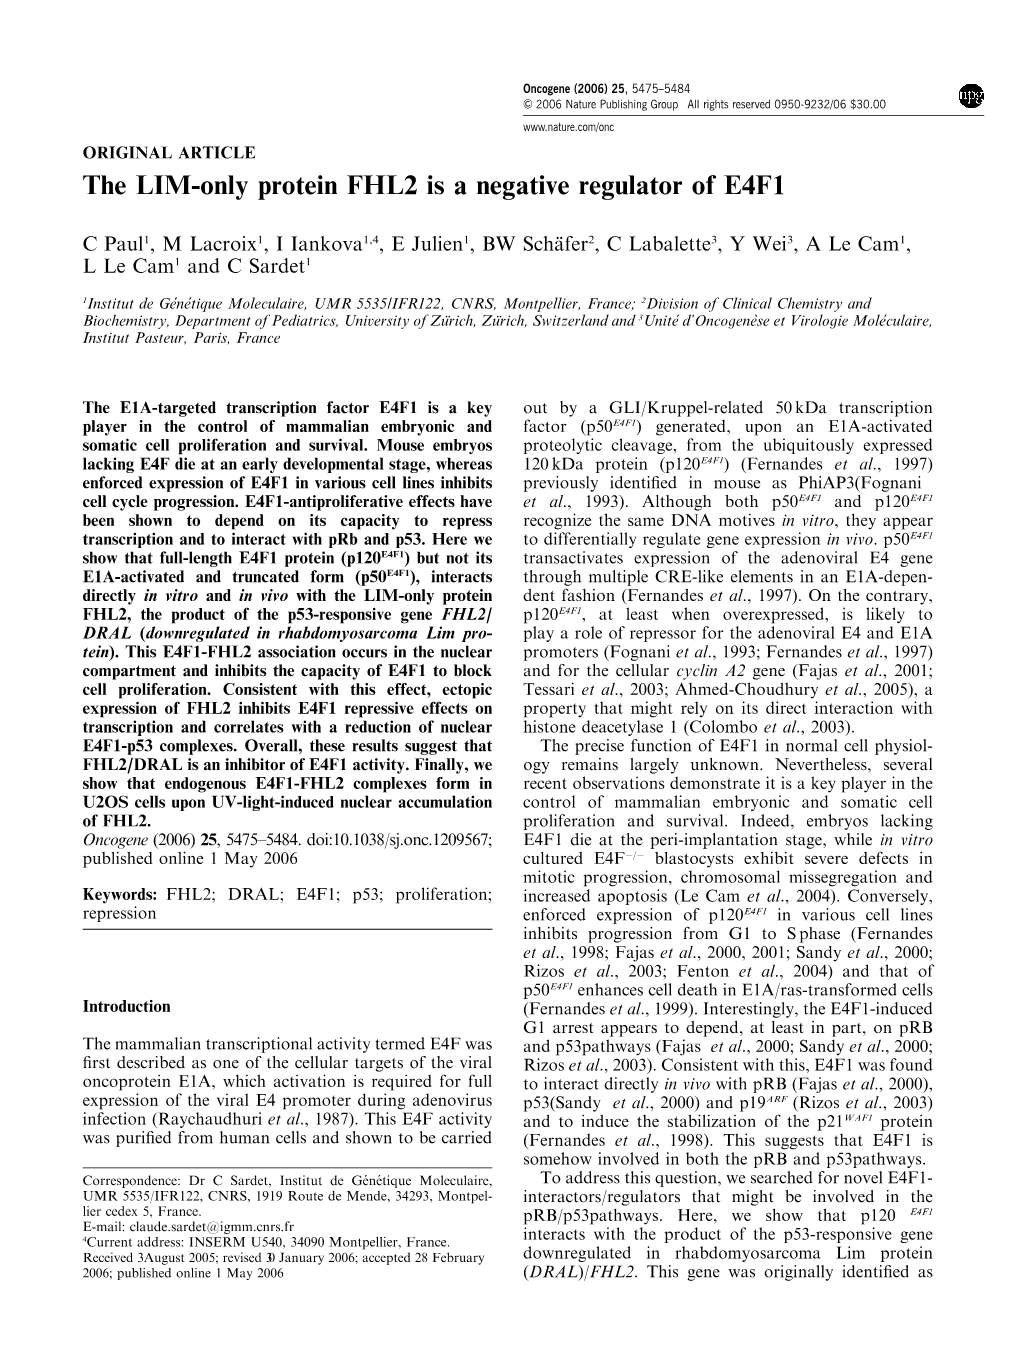 The LIM-Only Protein FHL2 Is a Negative Regulator of E4F1